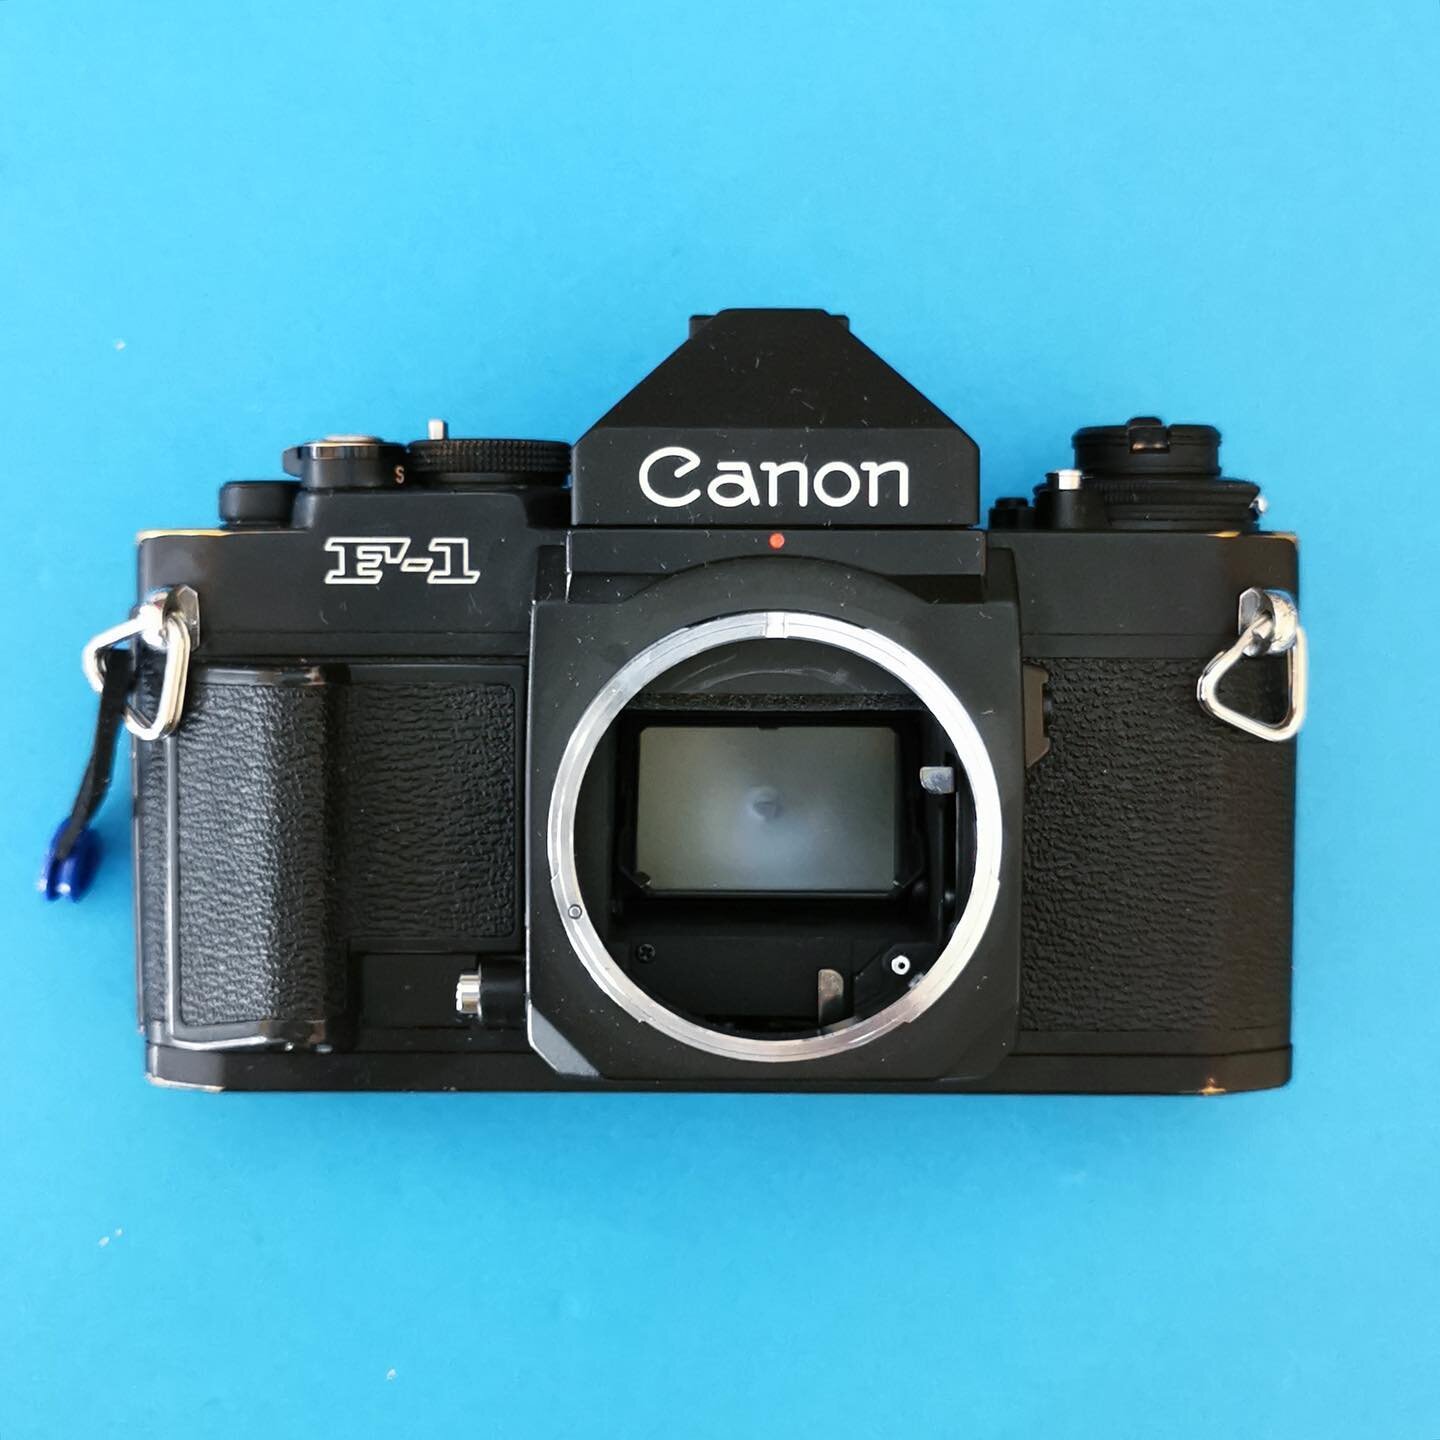 Canon F1- shutter and frame counter repaired , light seals replaced 
.

#canon #canonf1 #canonuk #canon  #ppprepairs #pppcamerasCanon  #pppcameras #ppprepairscanon #camerarepairs #photooftheday #photography #filmsnotdead #filmforever #keepfilmalive #